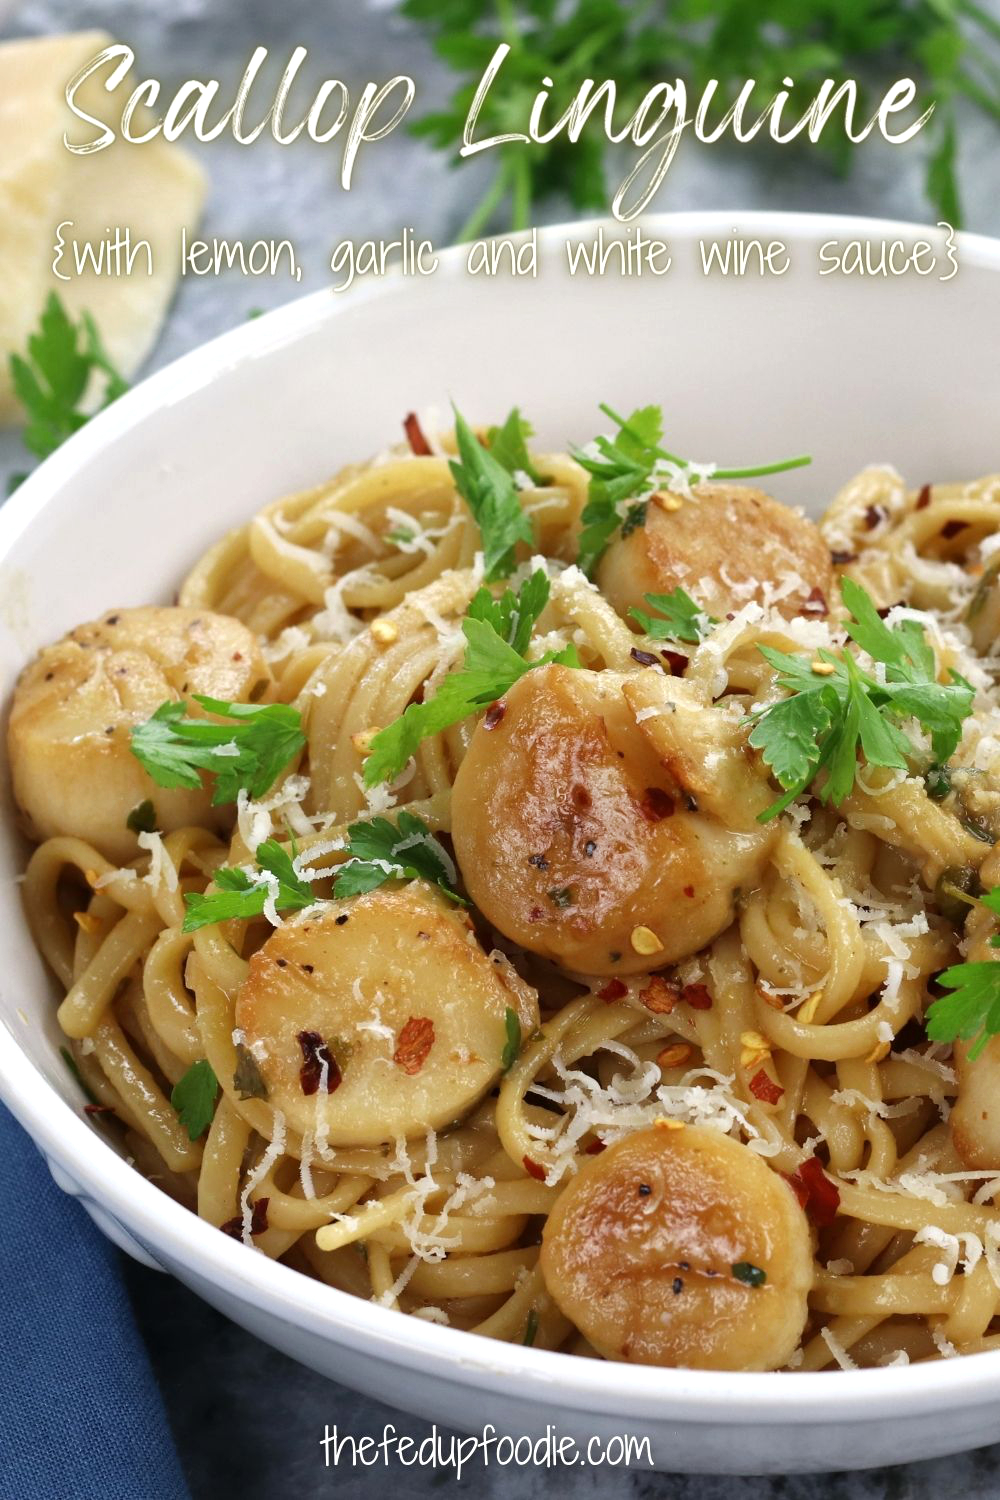 Scallop Linguine is an incredibly easy and fast pasta dish that brings together seared scallops and perfectly cooked linguine in a lemon garlic white wine sauce. This dish is elevated with the unique brininess of capers and anchovy fillets making it a delicious seafood pasta experience that is both elegant and comforting.
#ScallopLinguineRecipes #ScallopLinguine #ScallopLinguinePasta #ScallopDinnerIdea #ScallopPasta #ScallopPastaRecipe #EasyScallopPastaRecipe